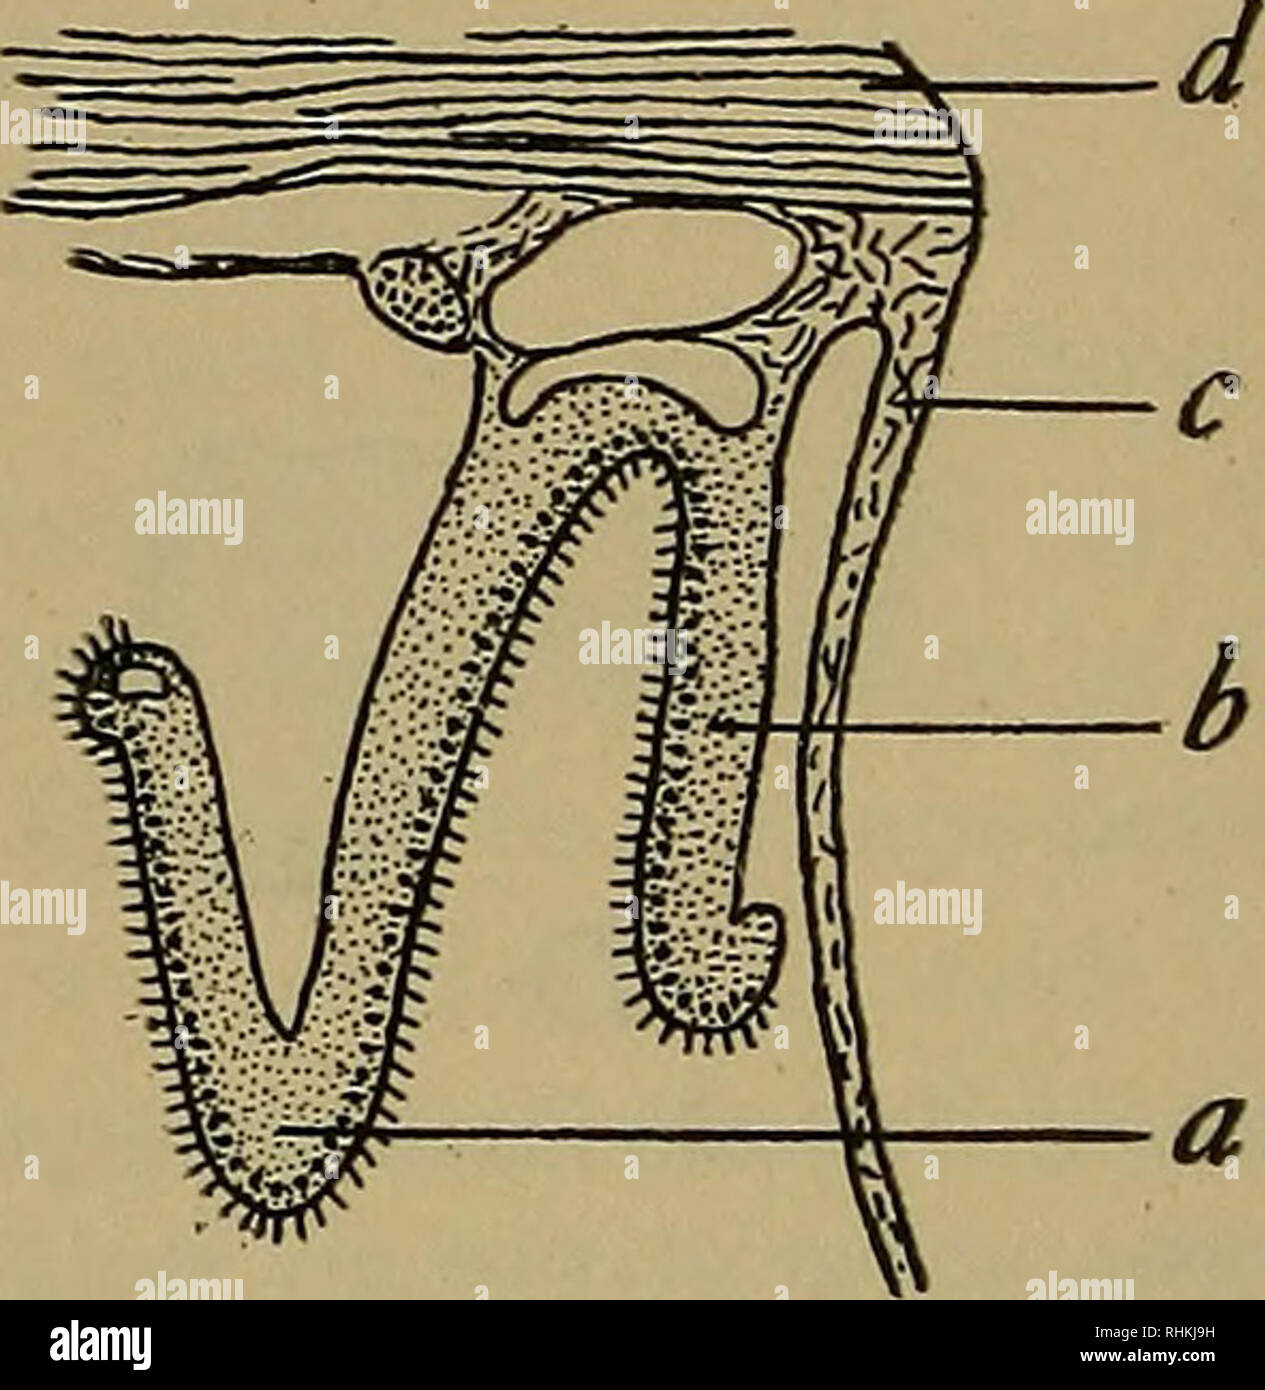 . The Biological bulletin. Biology; Zoology; Marine biology. Fig. 5. Section through ctenidium of Mytilus of 1.6 mm. length. Section passes through posterior end of reduced foot, a, filament of inner gill; b, filament of outer gill; c, mantle; d, intestine; e, foot. Magnification 140.. Fig. 6. Section through ctenid- ium of Mytilus of 1.6 mm. length. Section passes through middle of posterior adductor. a, filament of inner gill; b, filament of outer gill ; c, mantle; d, posterior adductor. Magnification 140. At first sight the two modes of filament formation seem fun- damentally distinct ; but Stock Photo